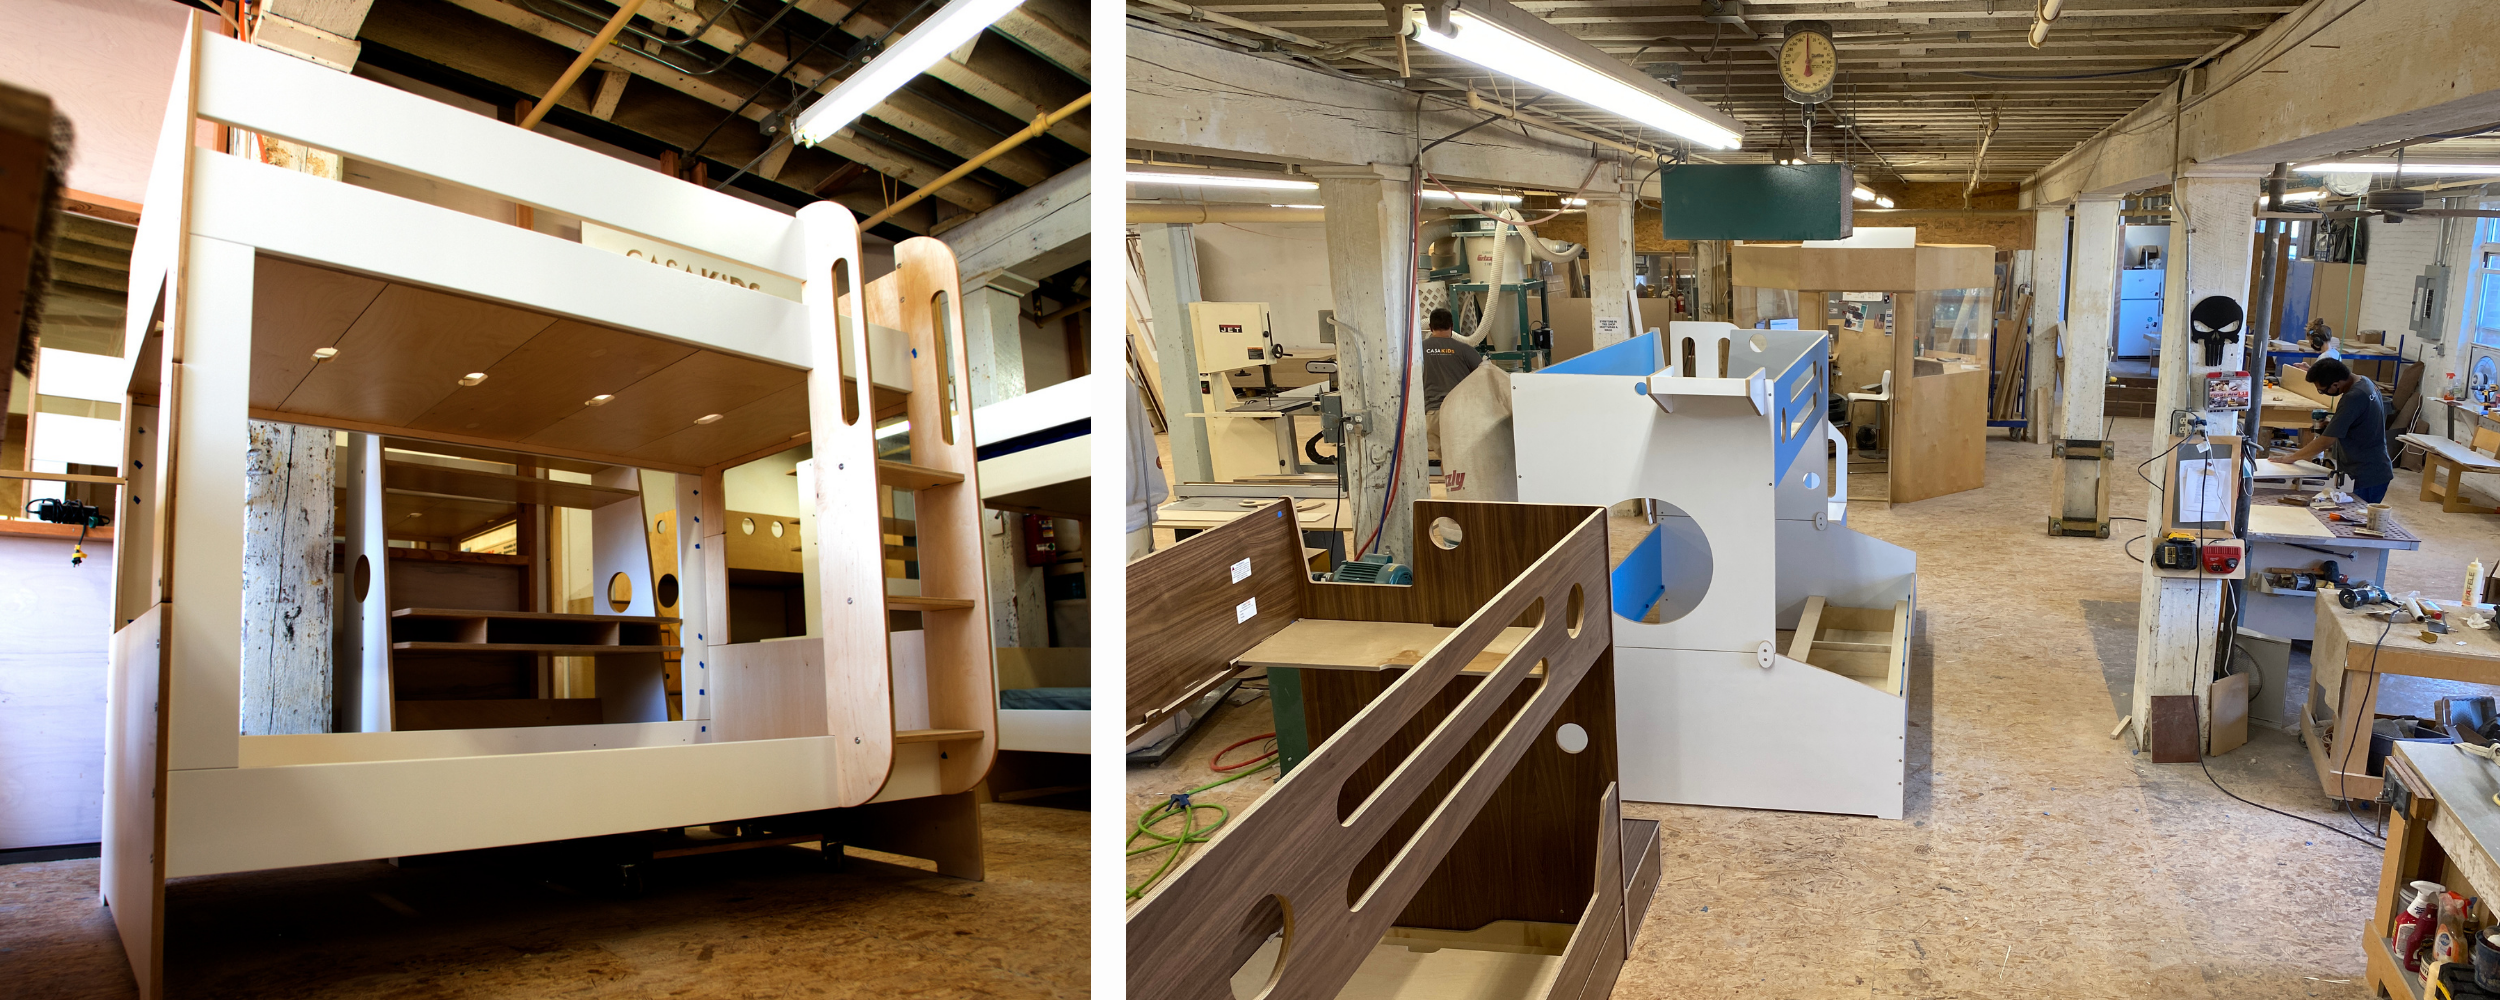 Collage: workshop scenes with furniture under construction, including a detailed view of a bunk bed.